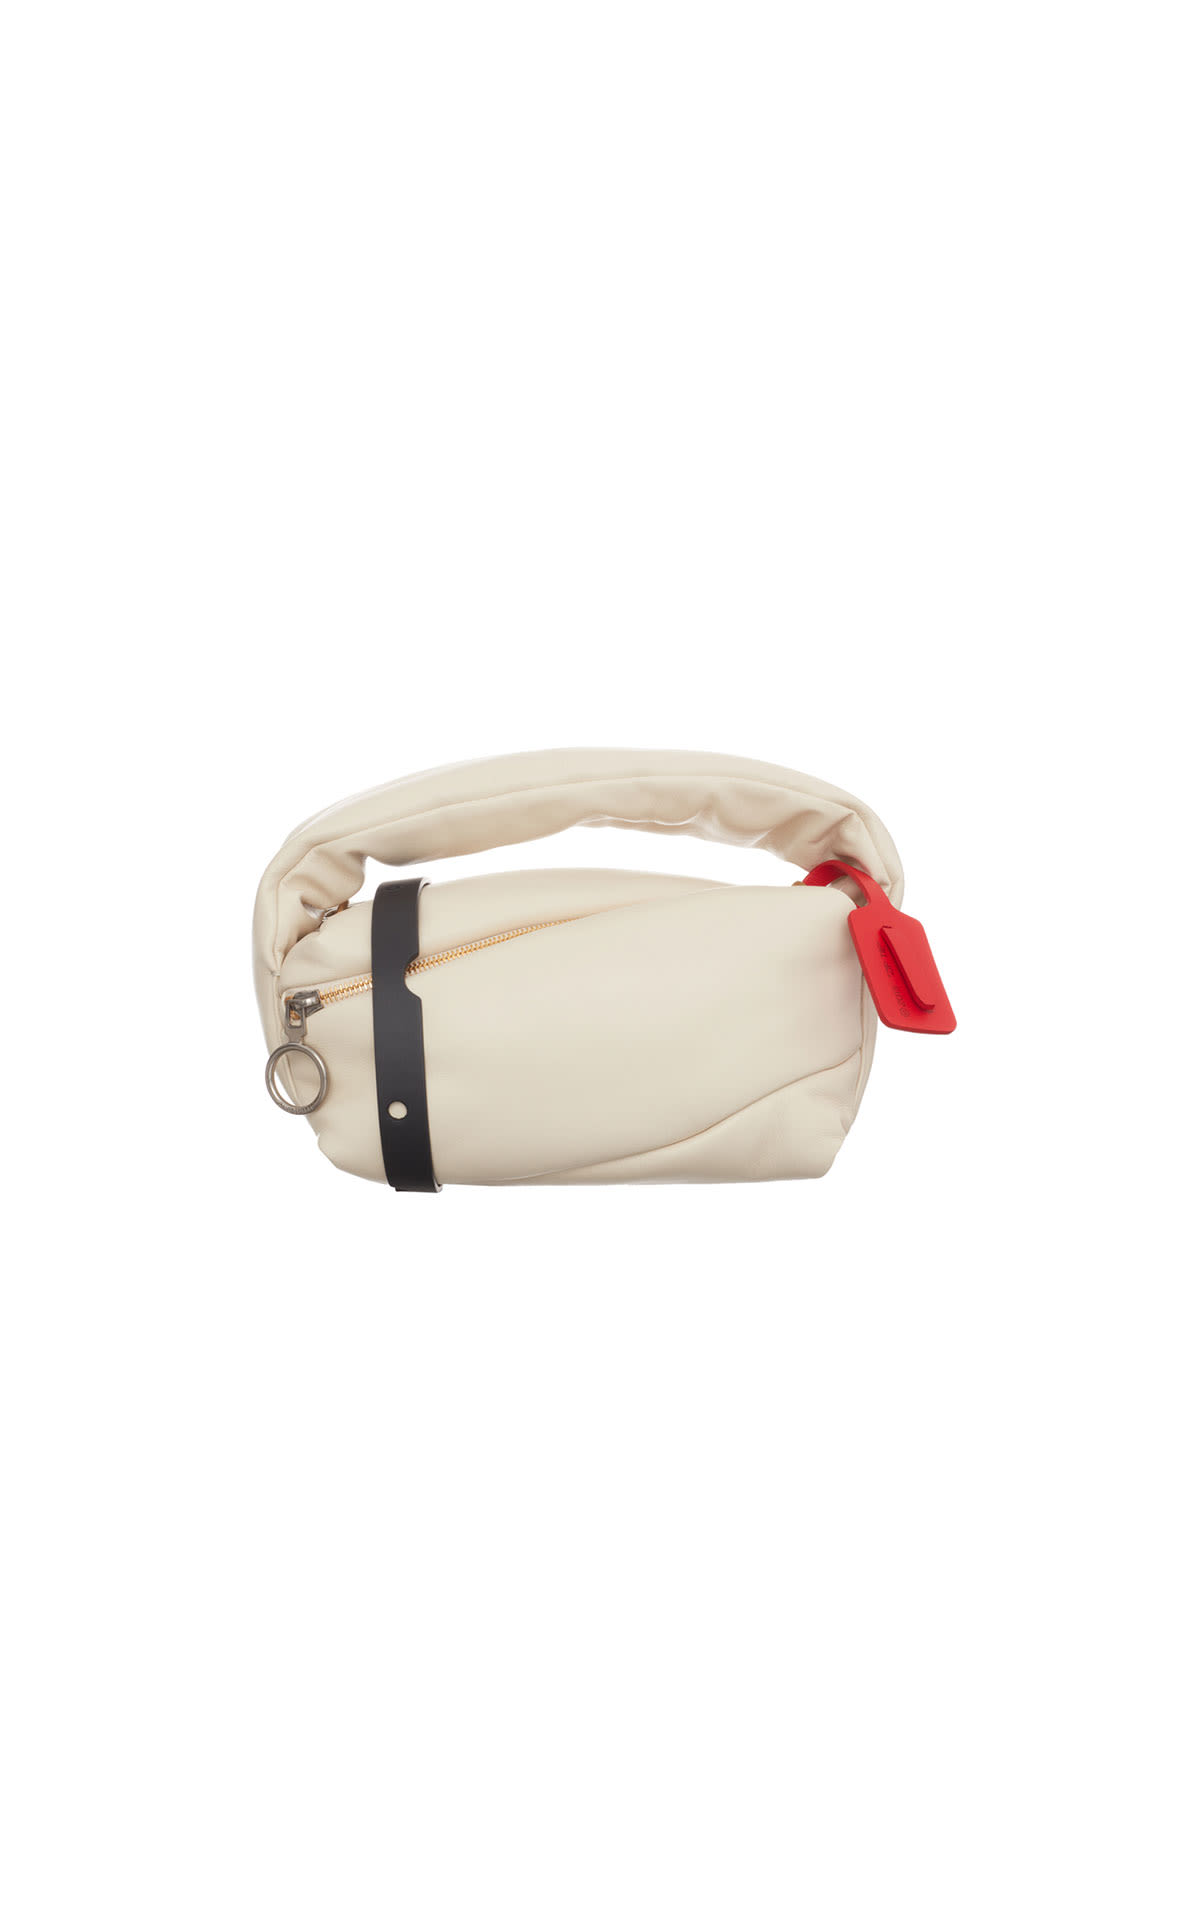 Off White Pump pouch bag from Bicester Village